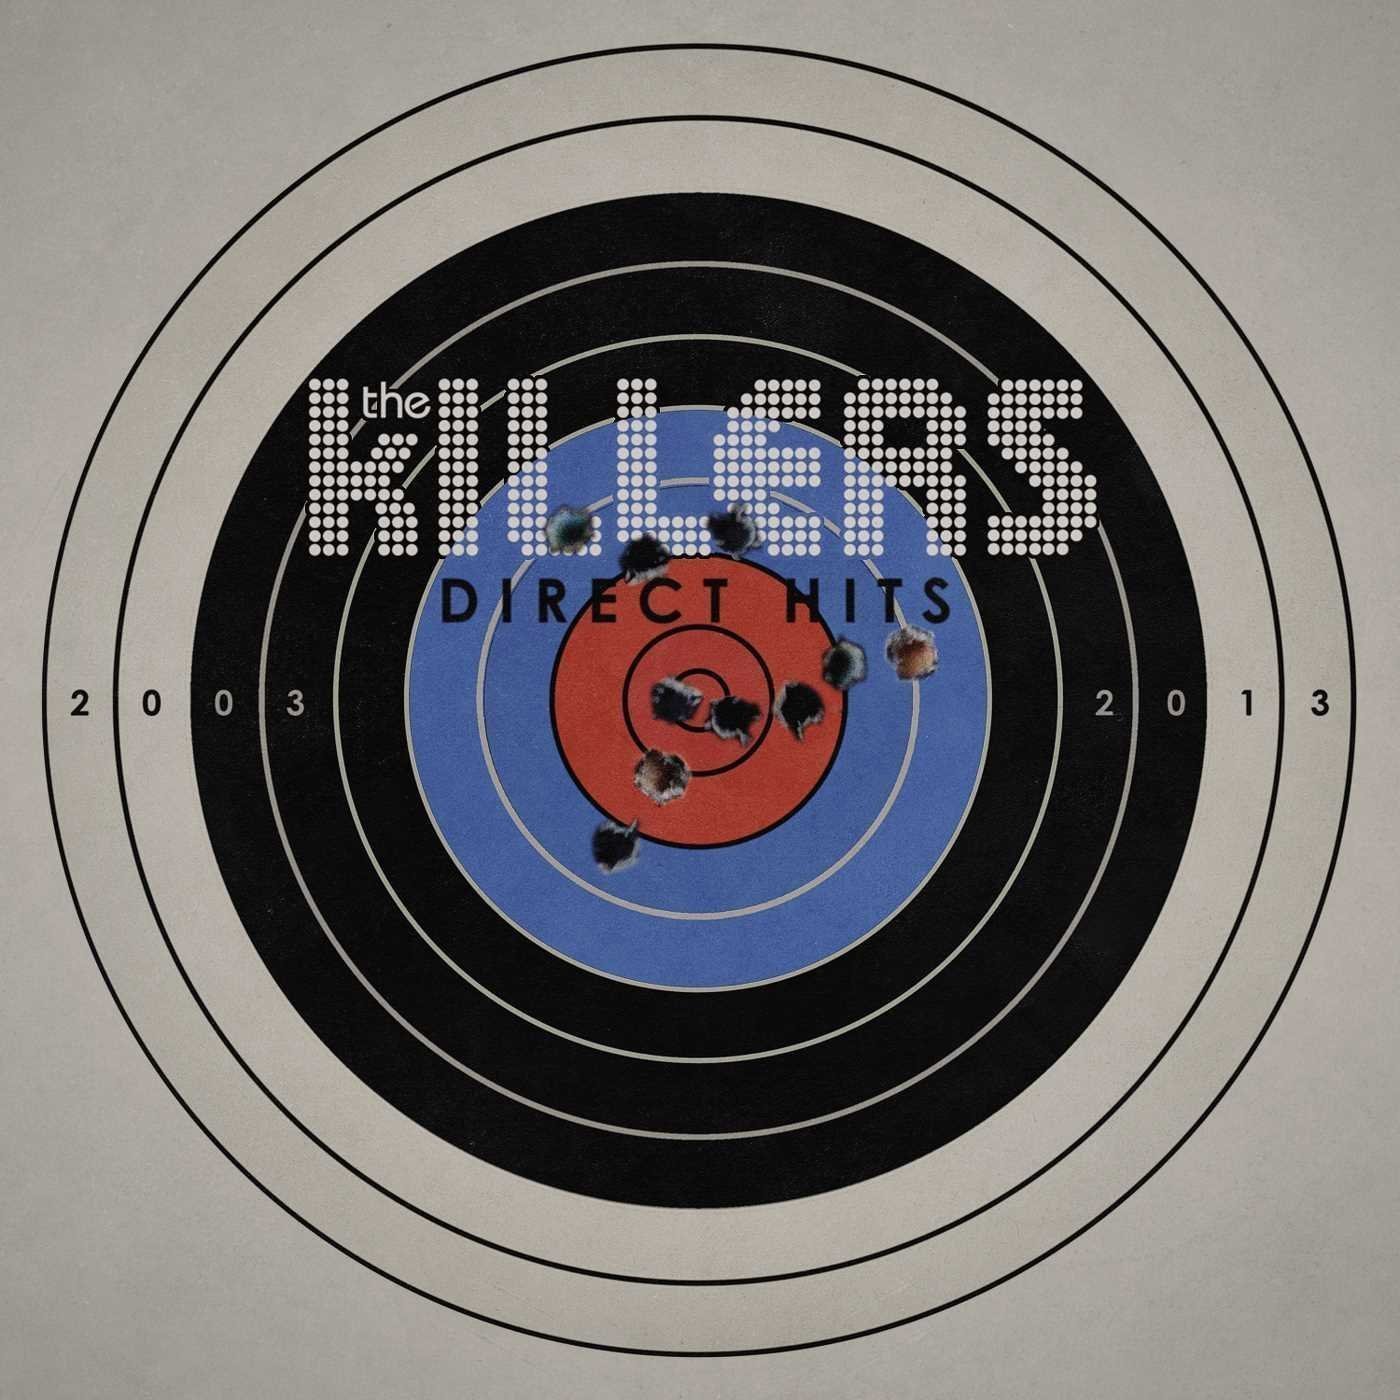 Vinyylilevy The Killers - Direct Hits (2 LP)